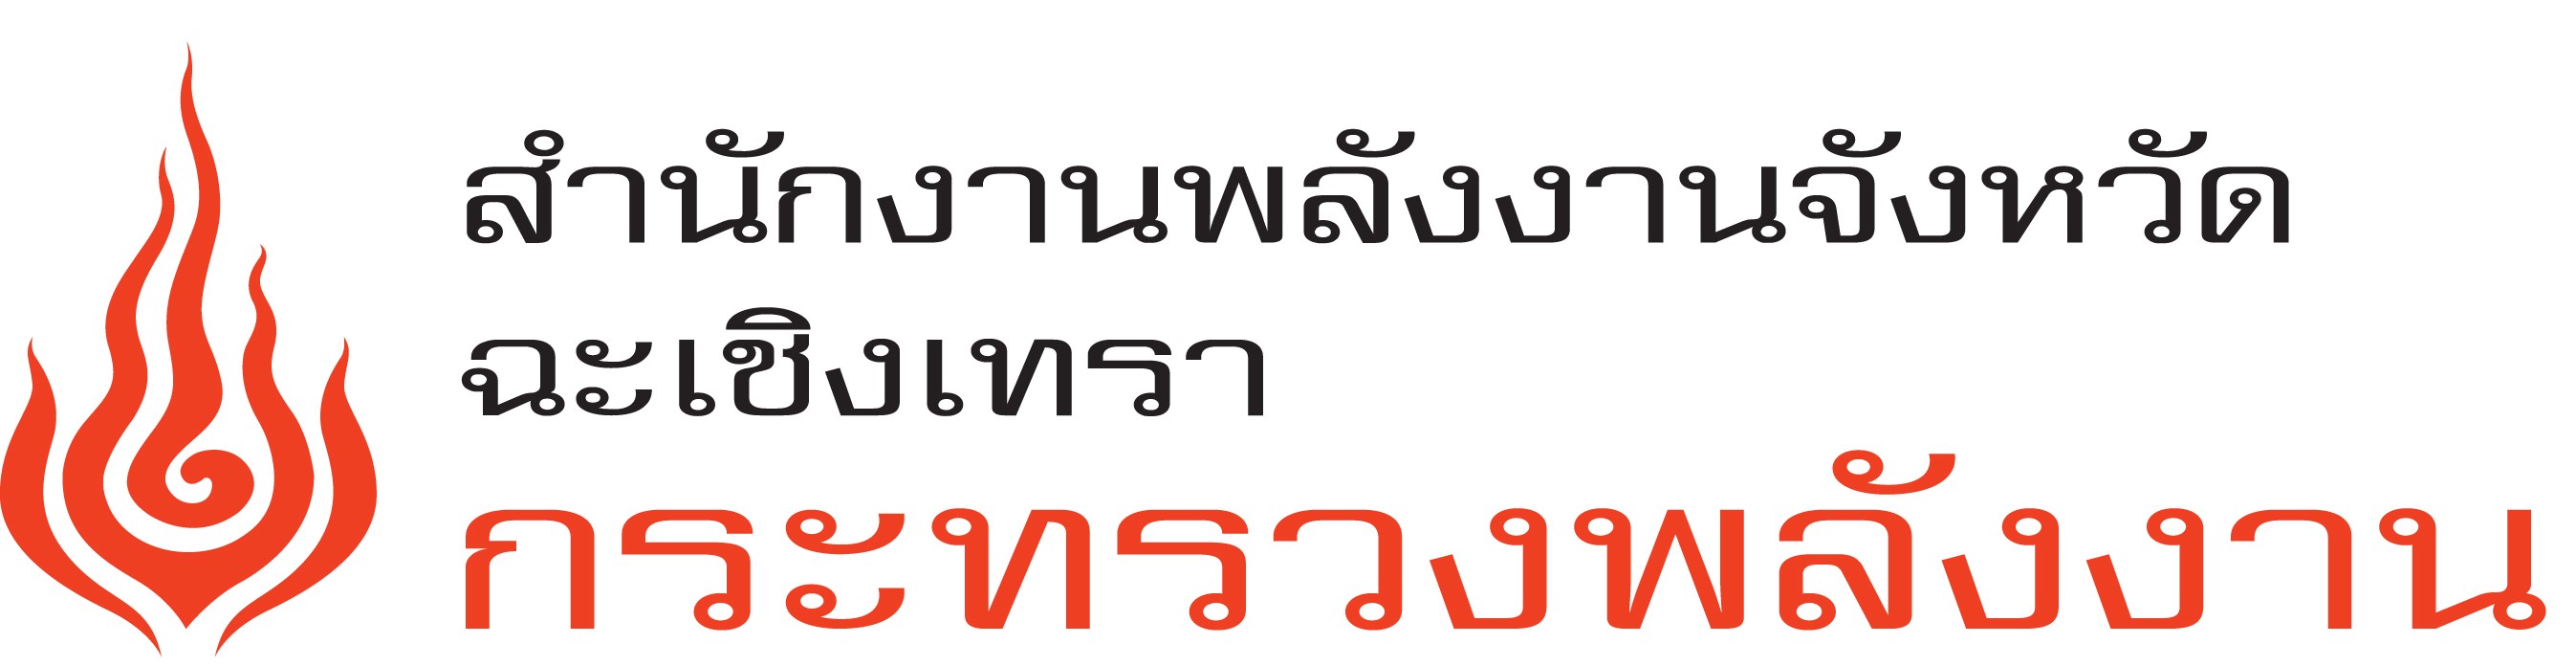 chachoengsao-official-energy